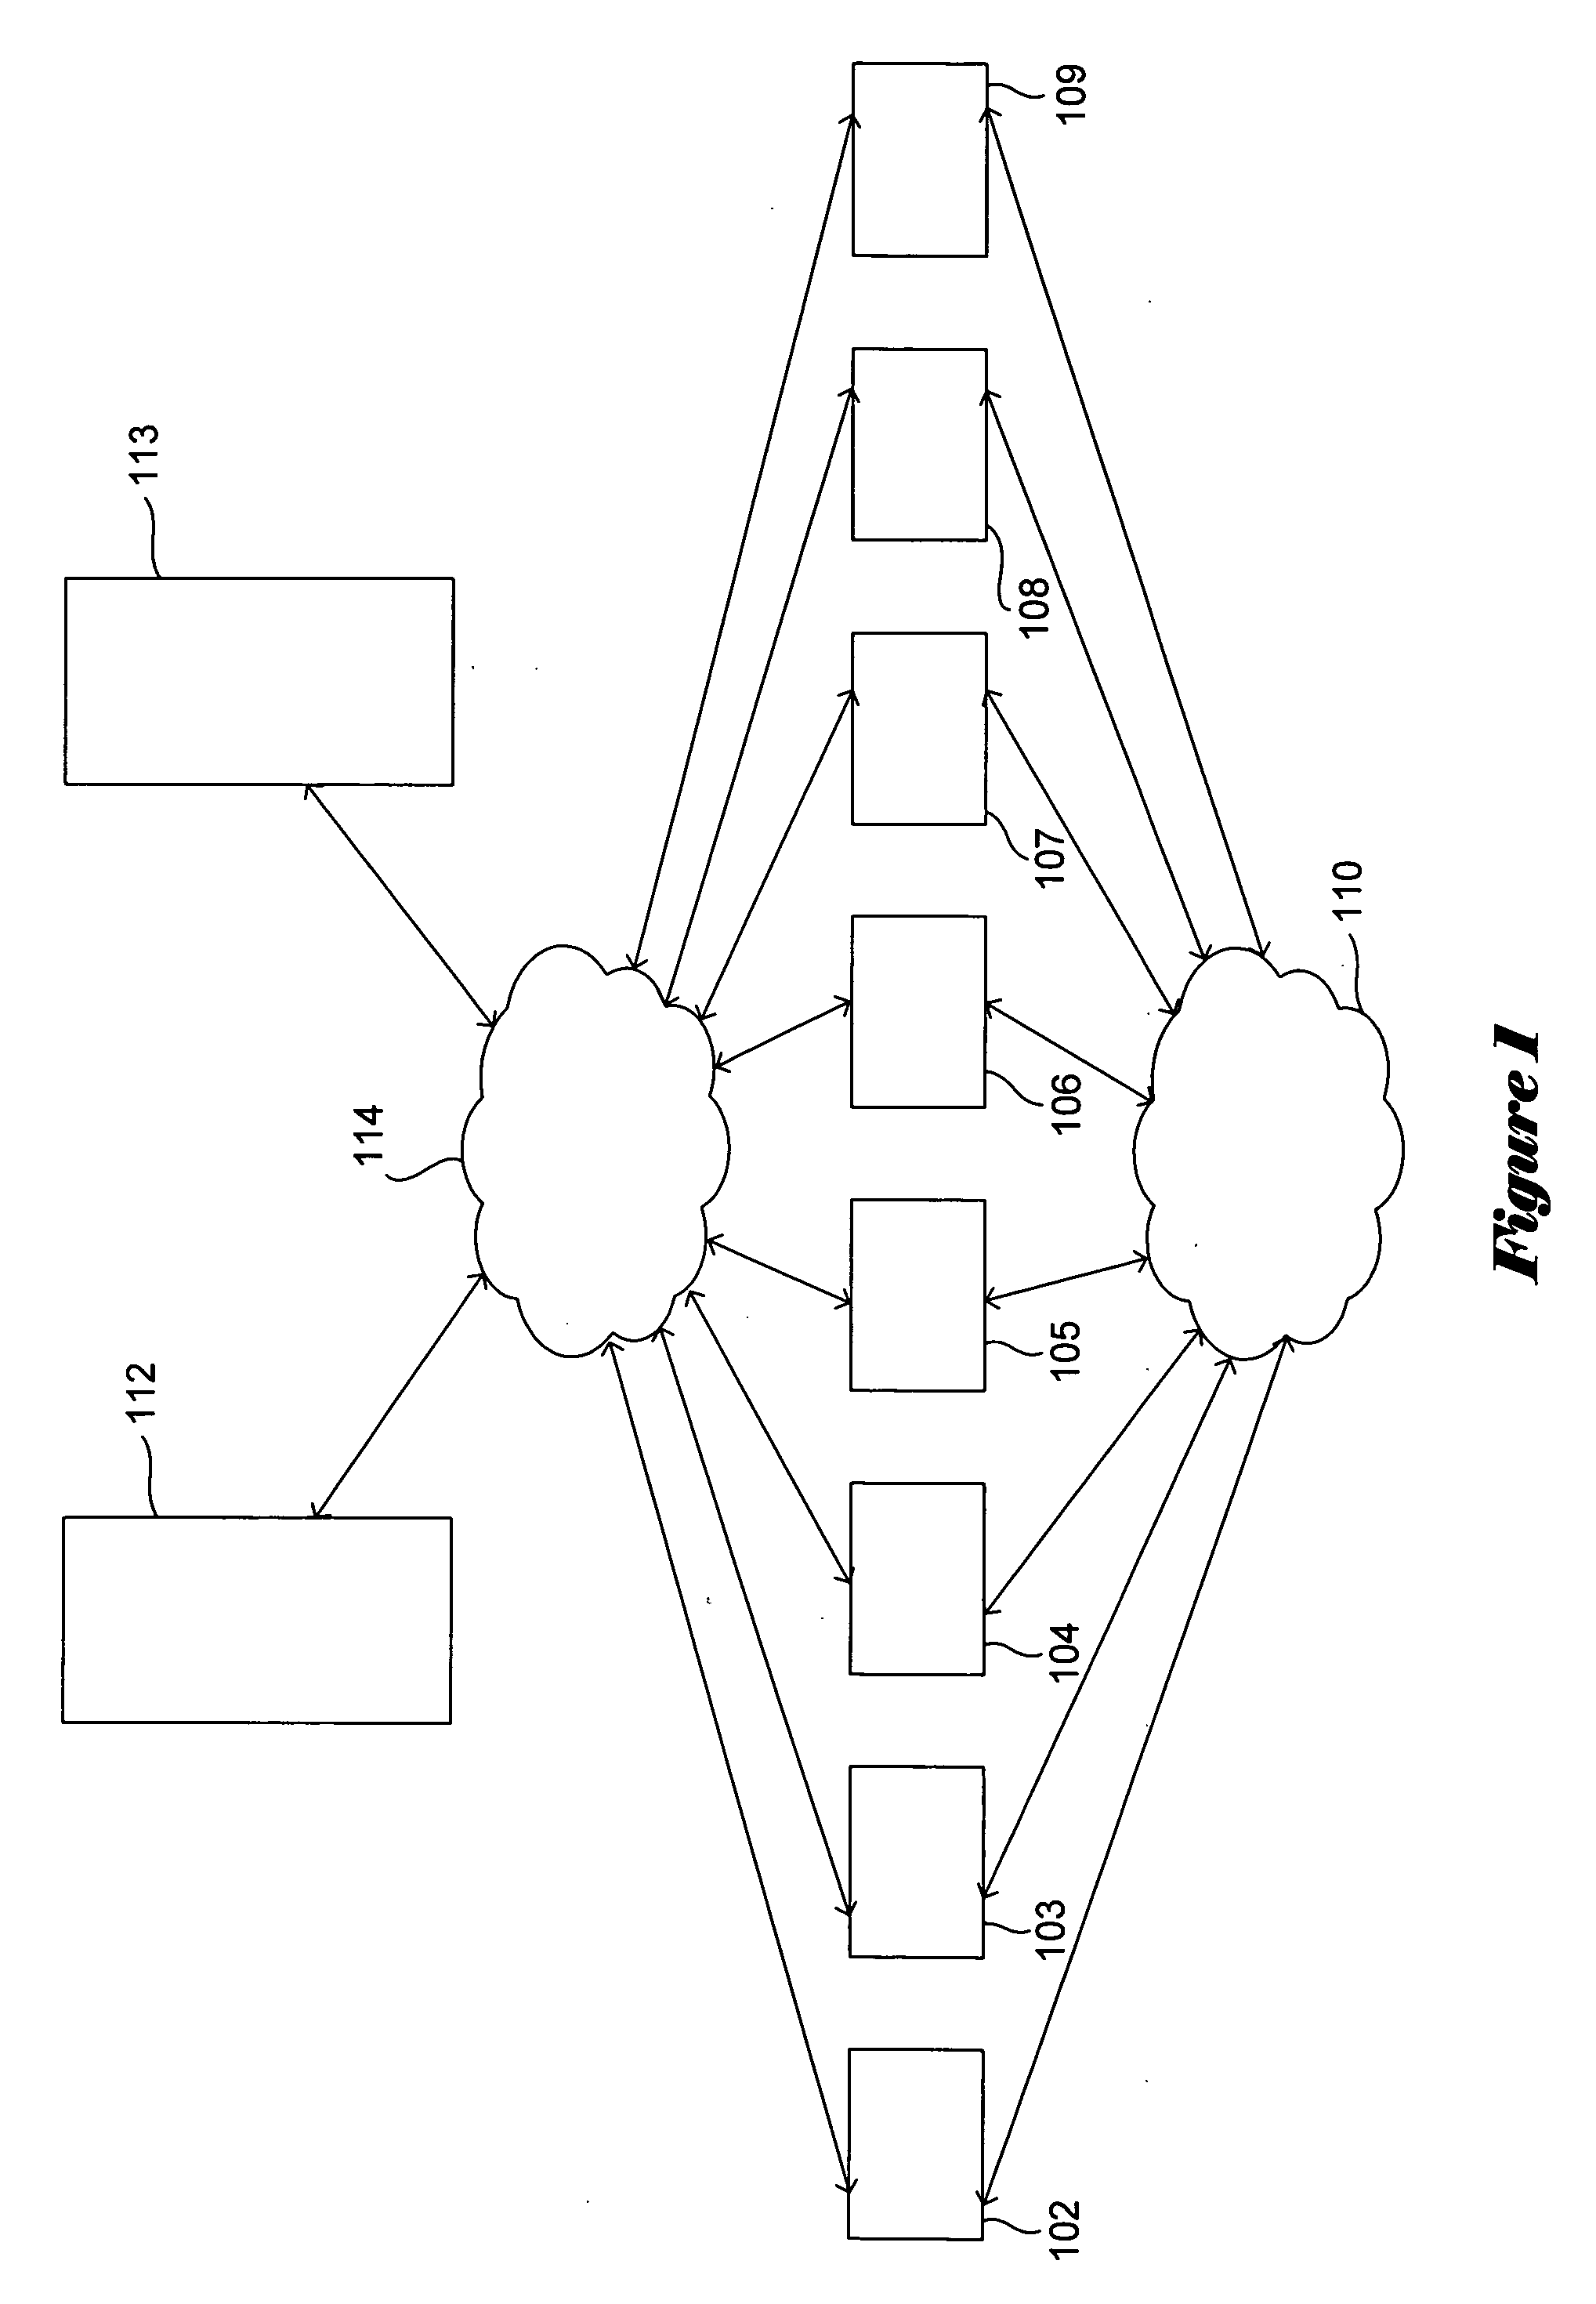 Distributed data-storage system